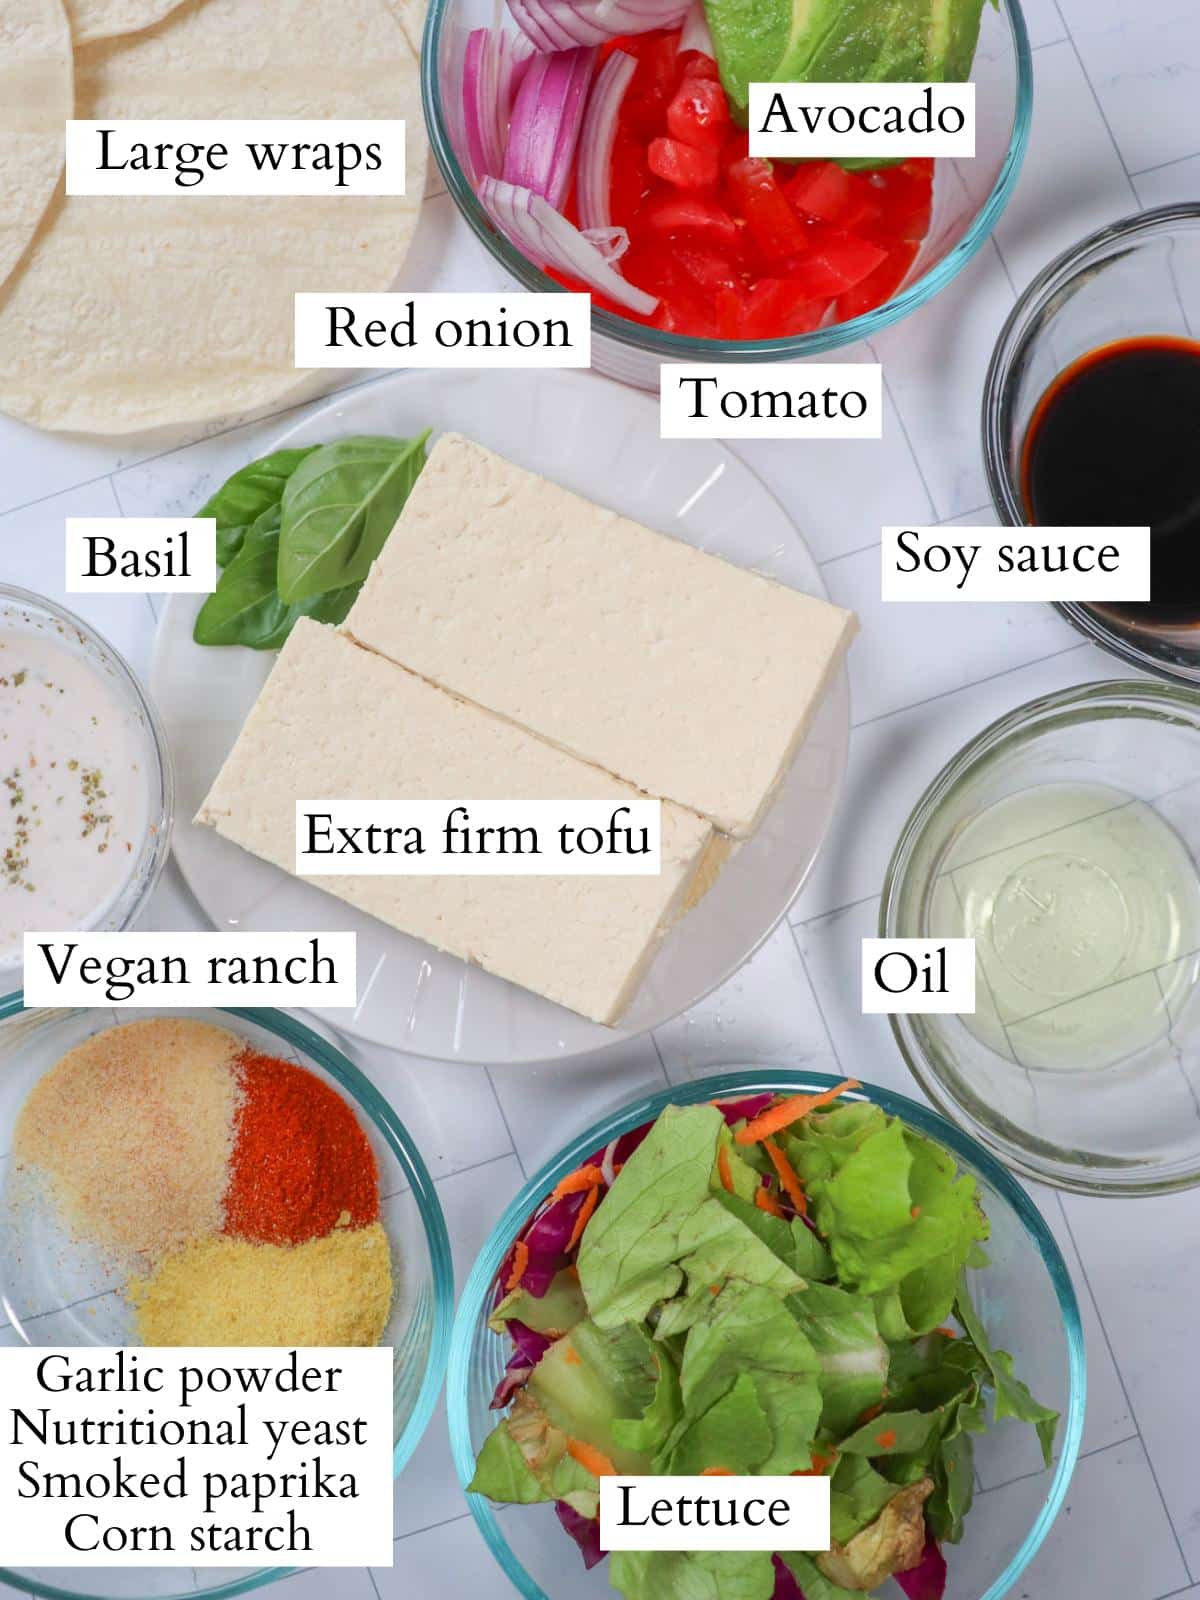 Ingredients for vegan tofu wrap laid out on a kitchen counter.